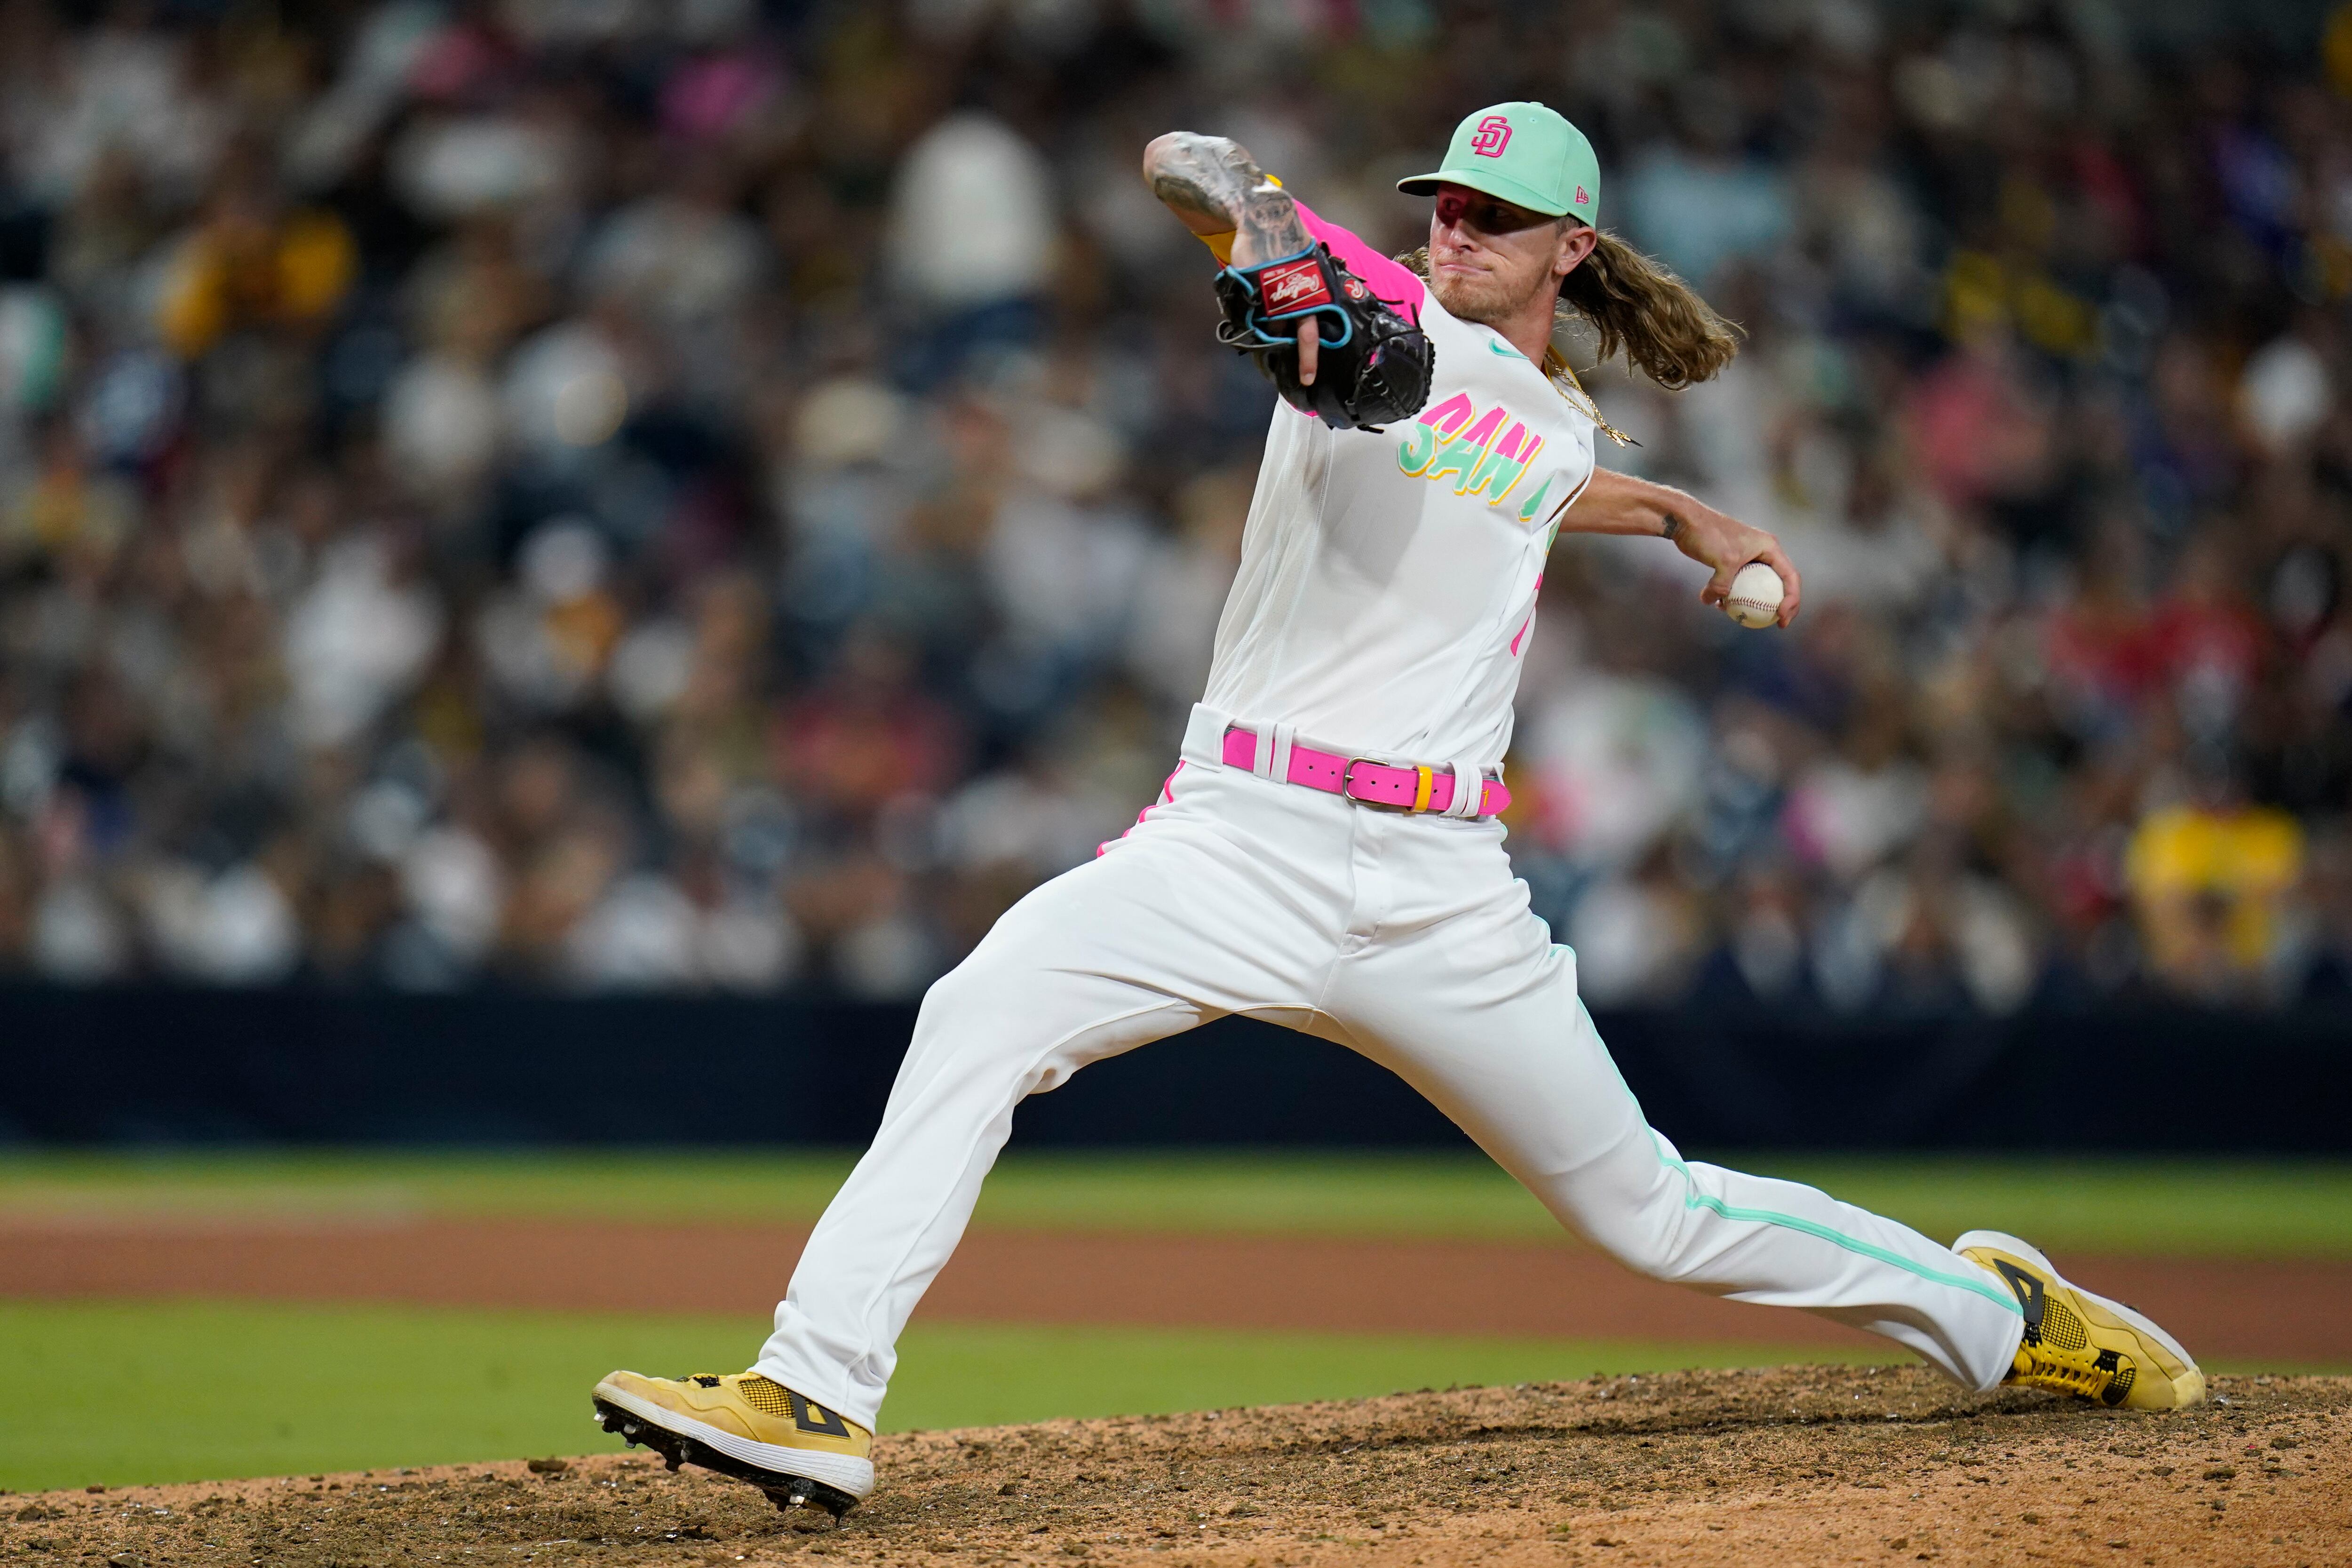 Padres give Josh Hader break from closer role after shaky outings